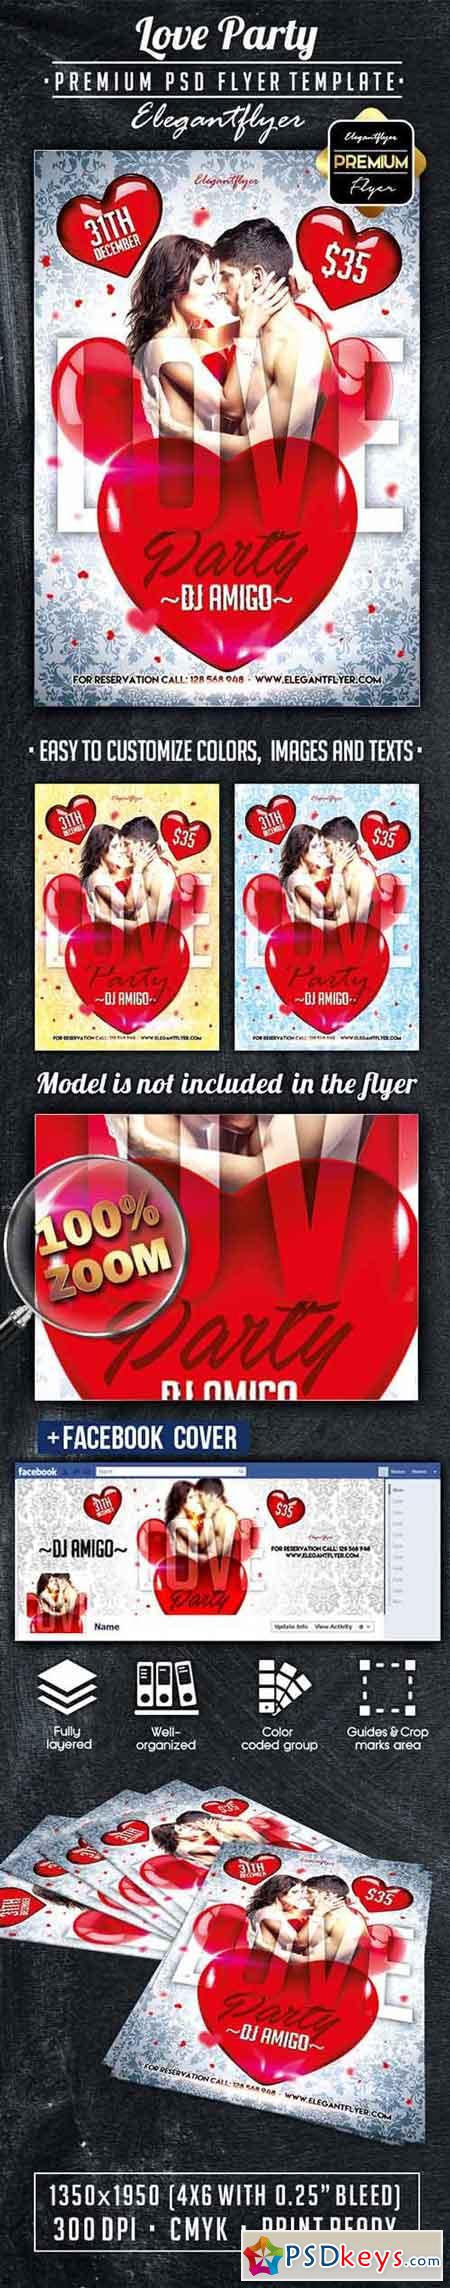 Love Party  Flyer PSD Template + Facebook Cover